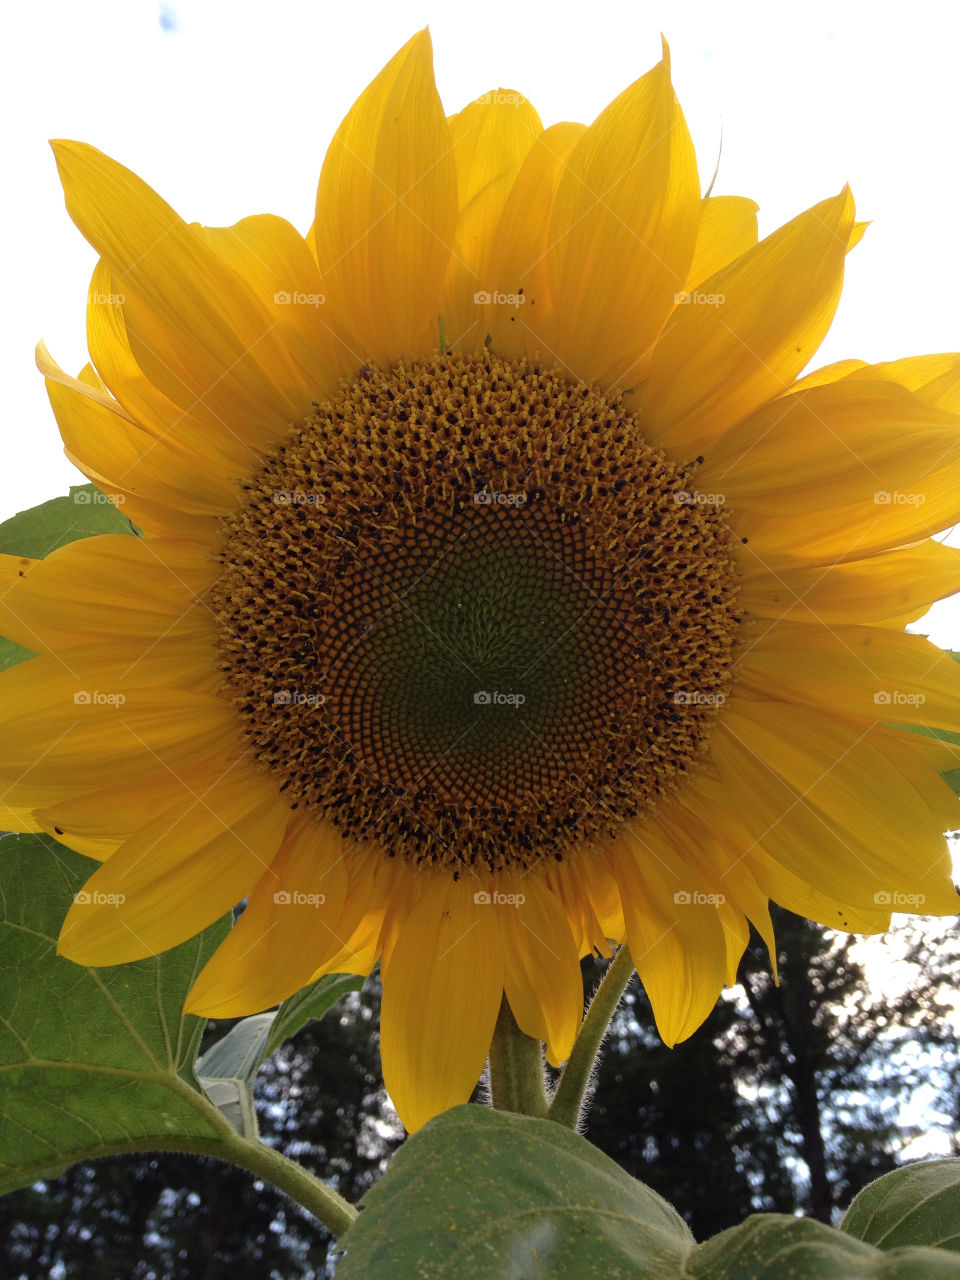 sweden yellow sunflower by ullevidsdal